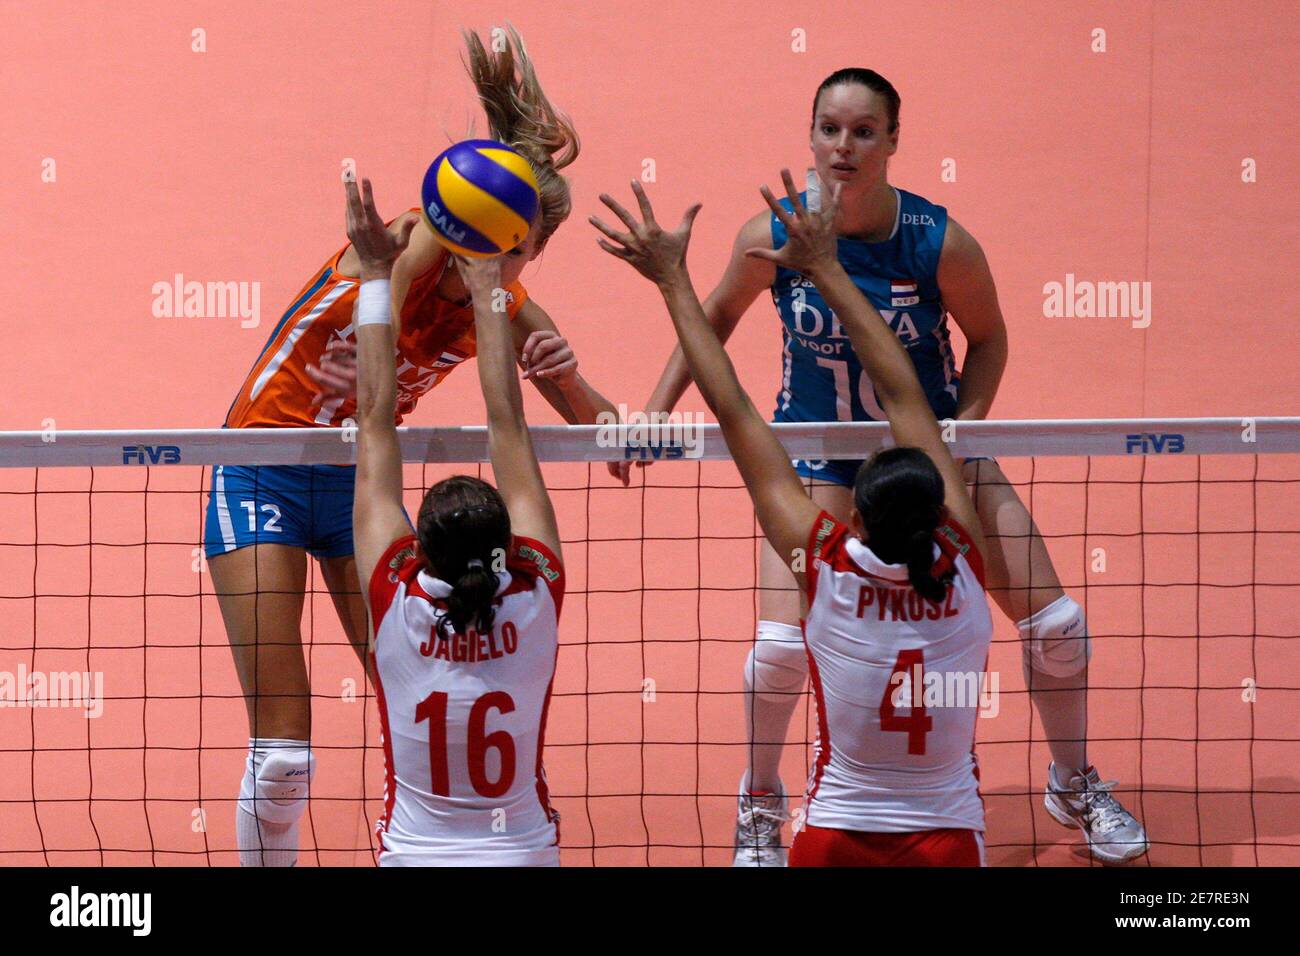 Netherlands' Manon Flier (top L) competes against Poland's Aleksandra Jagielo (16) and Dorota Pykosz (4) during the FIVB World Grand Prix women's volleyball tournament in Hong Kong August 14,2009.    REUTERS/Tyrone Siu    (CHINA POLITICS SPORT VOLLEYBALL) Stock Photo